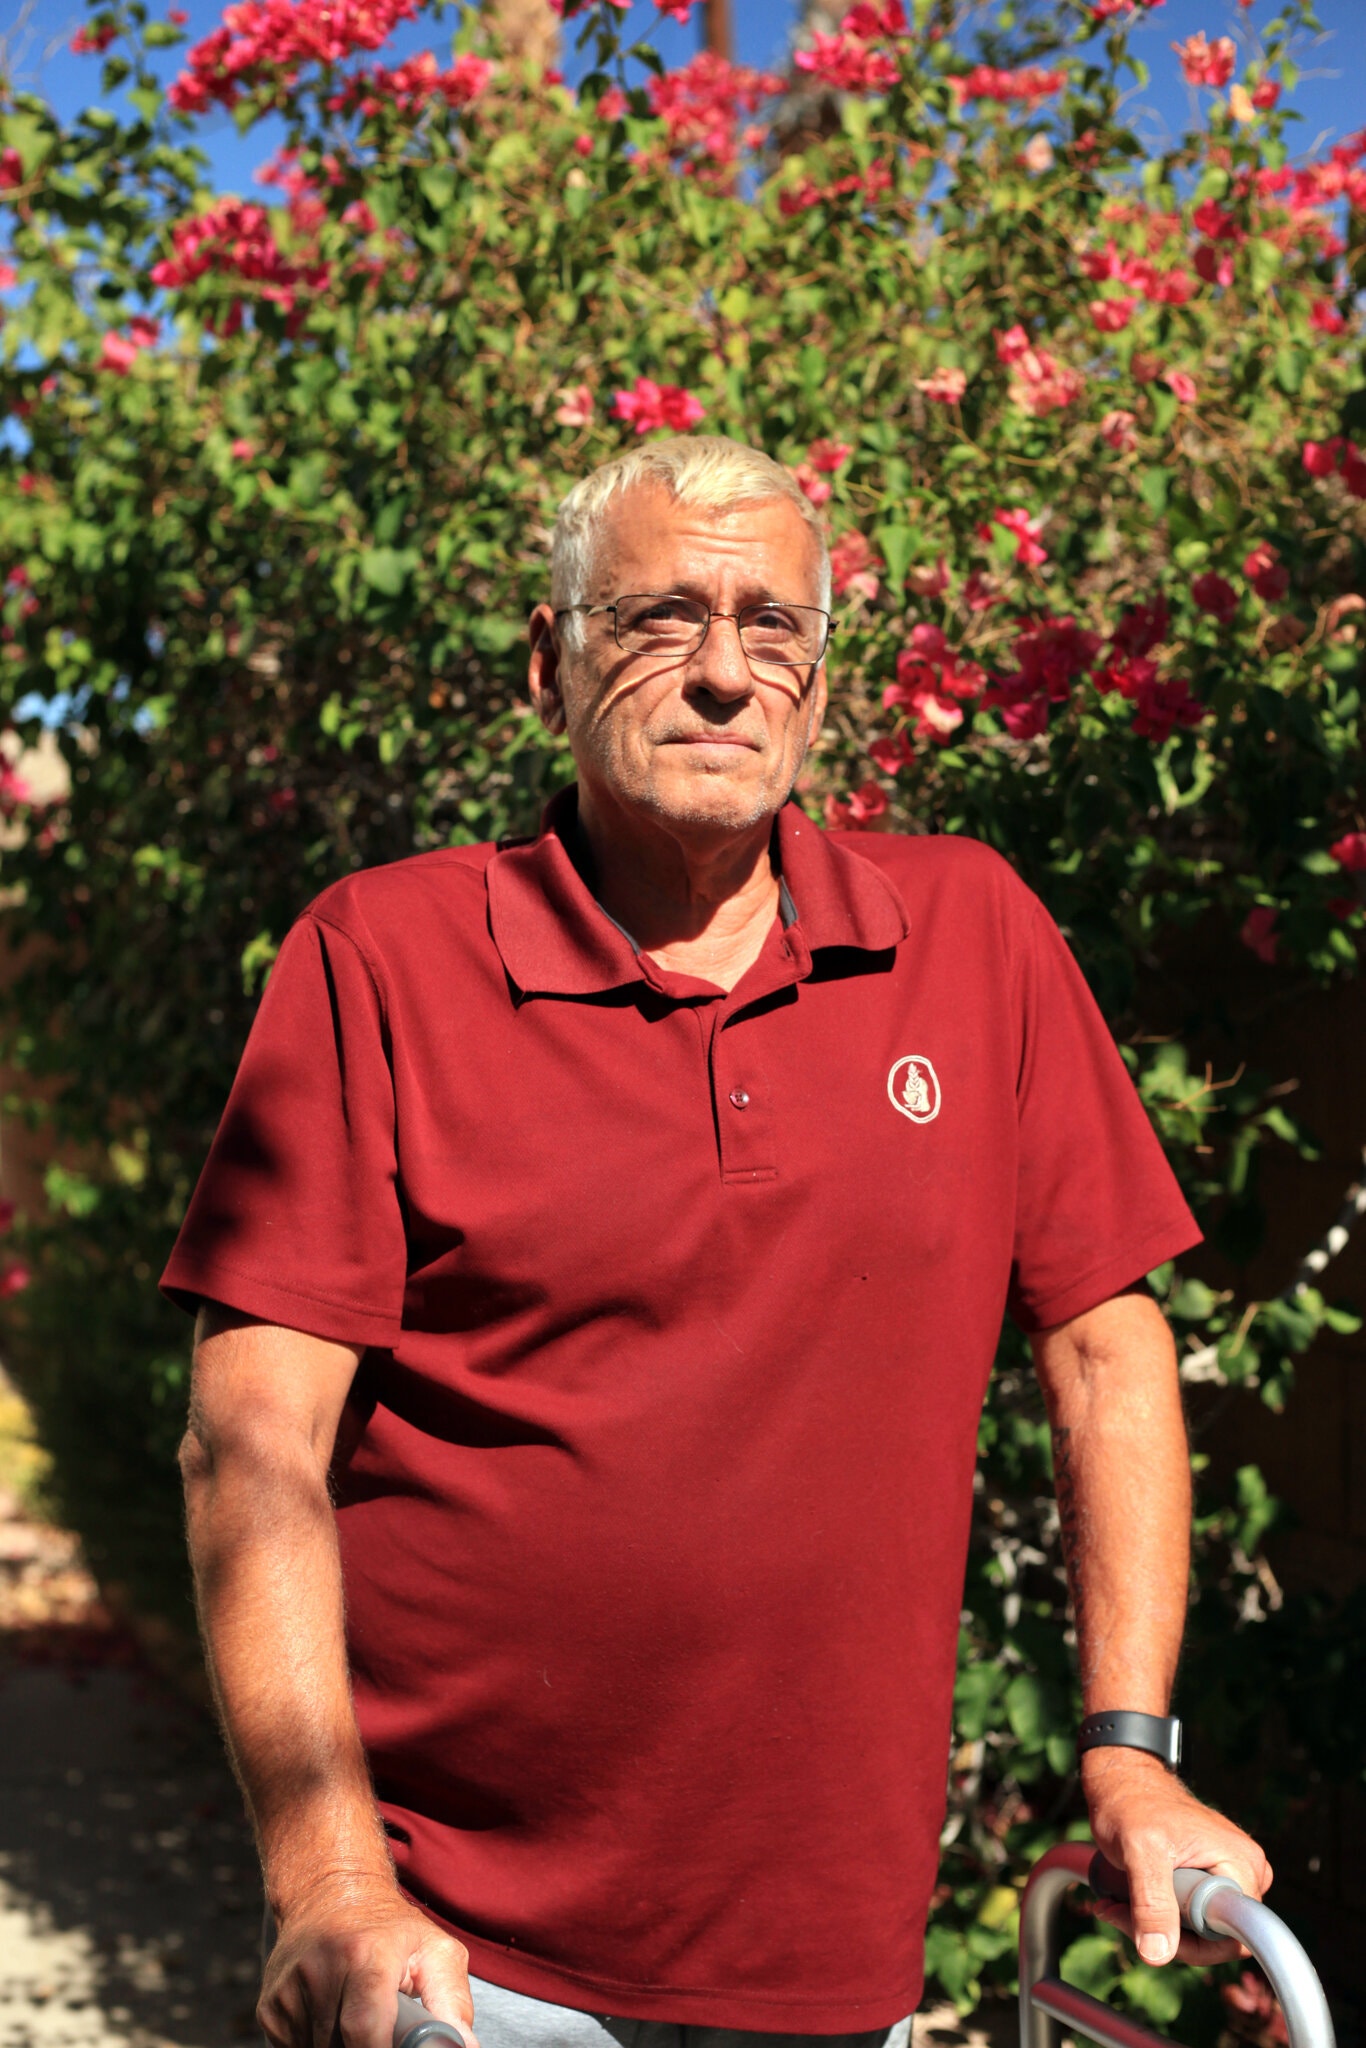 An elderly man with short white hair and glasses stands outdoors in front of a lush, flowering bush. Wearing a maroon polo shirt and using a walker, he seems deep in thought. The sun shines brightly, casting clear shadows and enhancing the colors of the flowers—capturing a scene worthy of Berkeley Journalism.